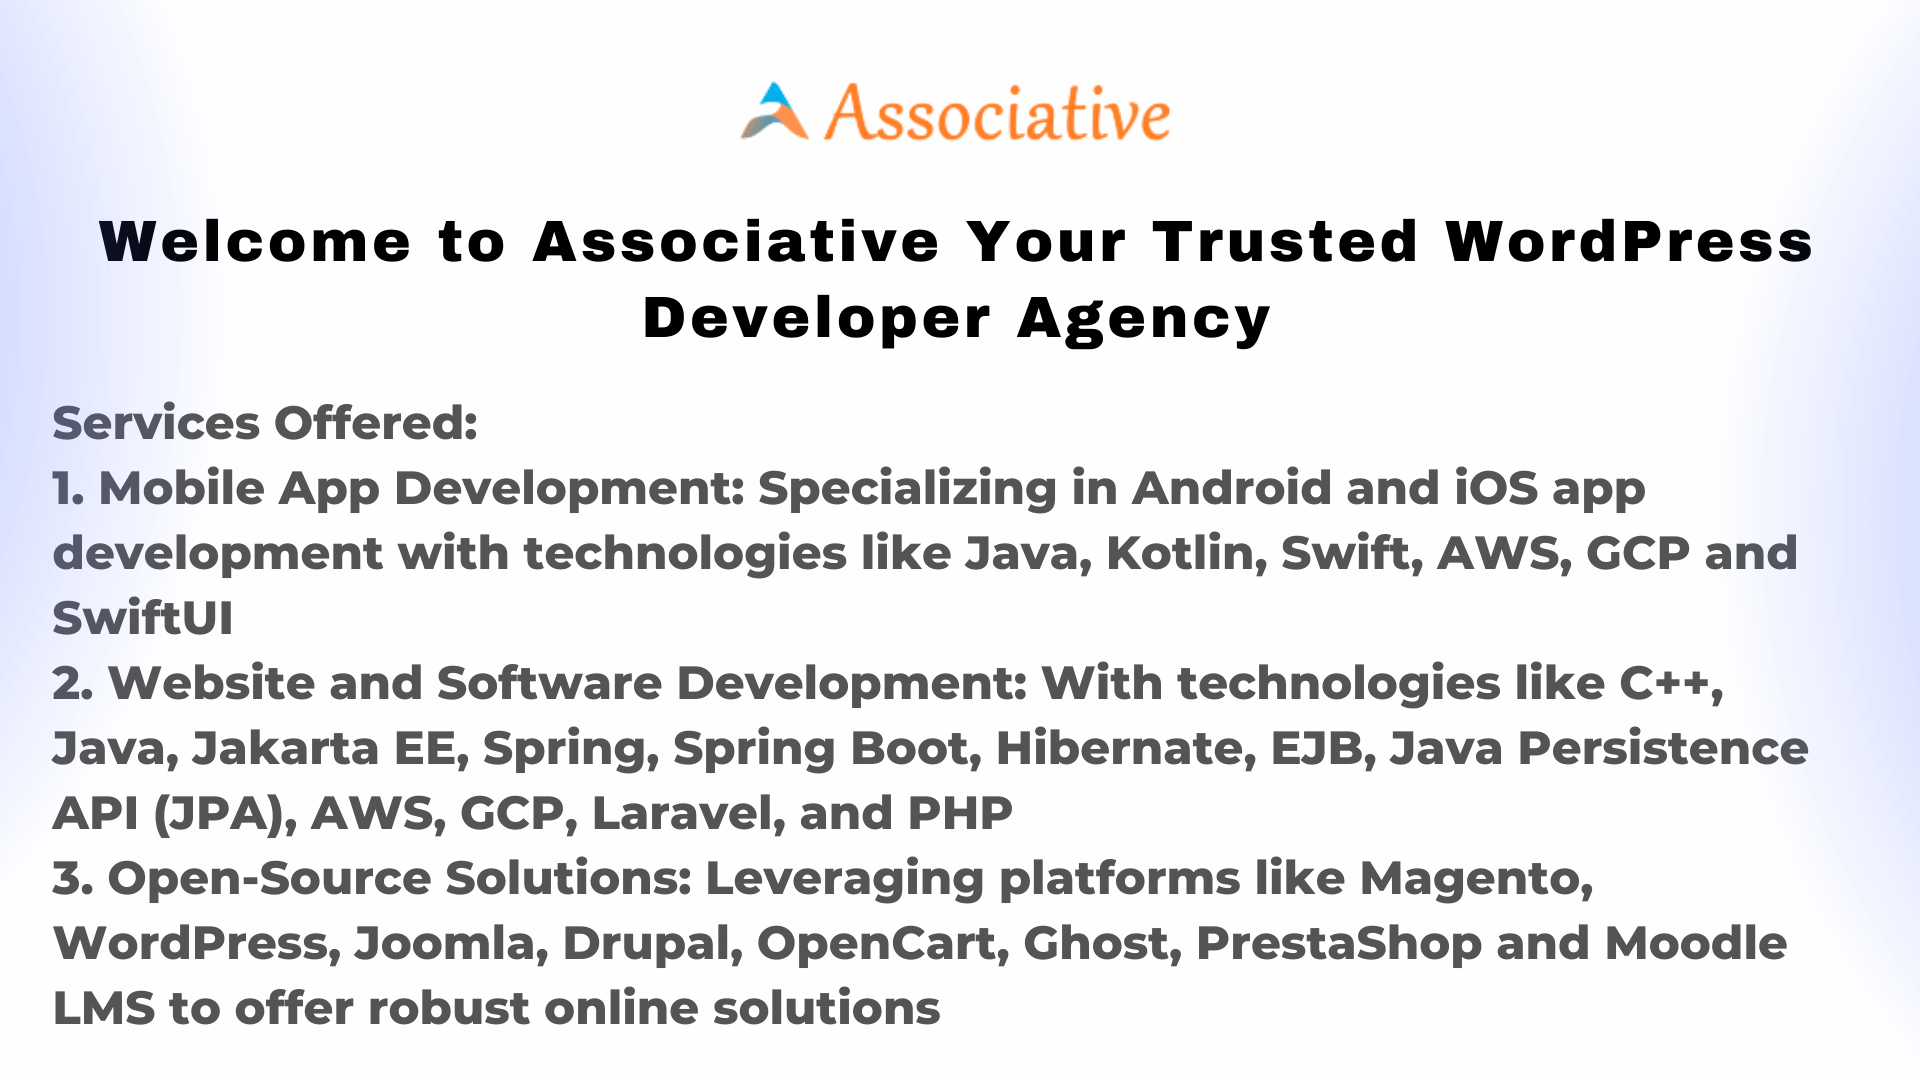 Welcome to Associative Your Trusted WordPress Developer Agency